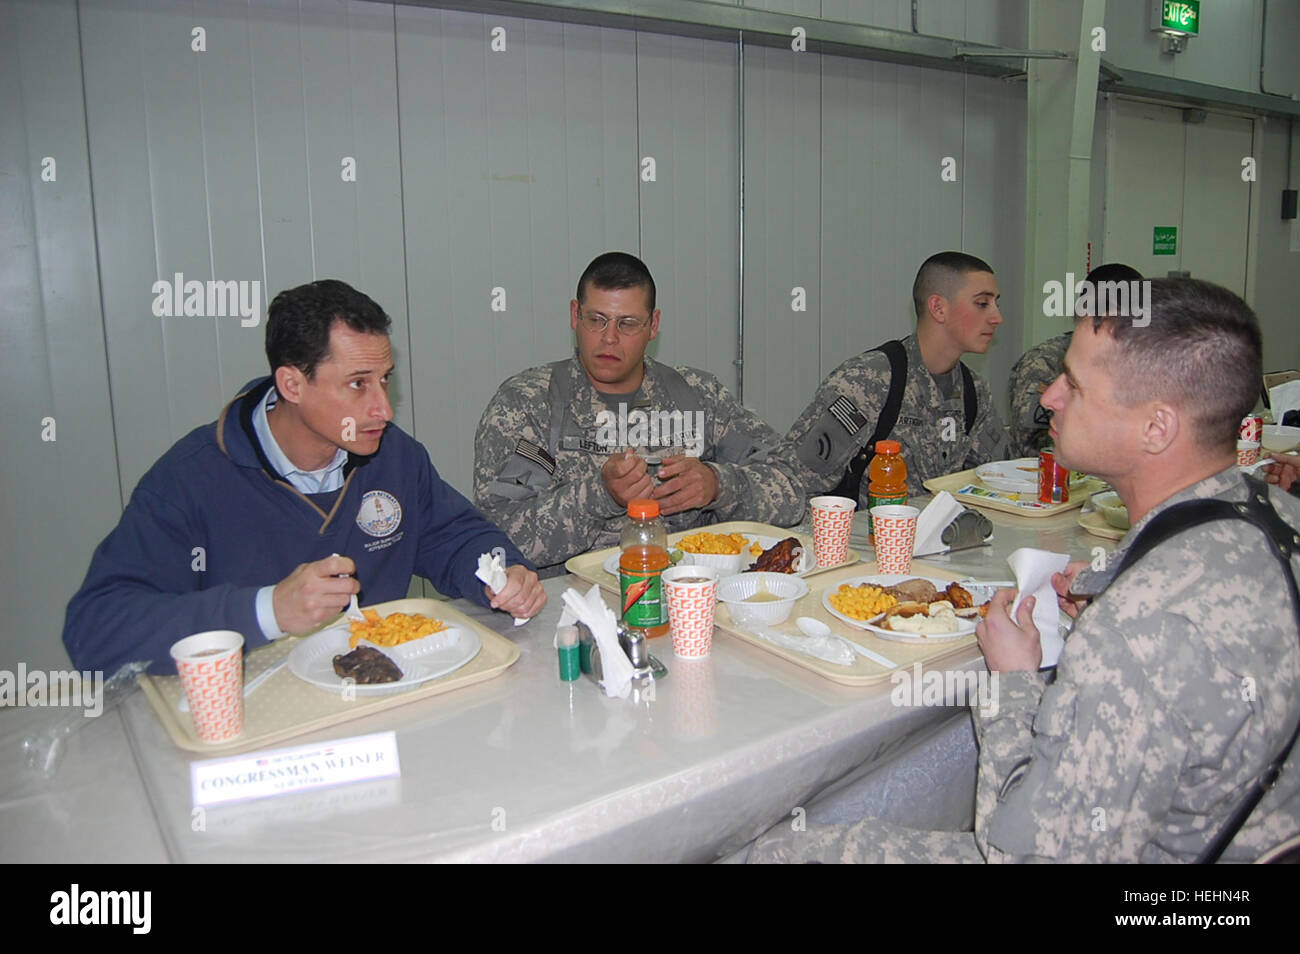 New York Congressman Anthony Weiner has dinner with Soldiers from 3-142 Assault Helicopter Battalion, a N.Y. National Guard Unit, at a dining facility in Baghdad, Dec. 22. Congressman Weiner, along with the N.Y. governor and three other congressmen, visited troops throughout Iraq during the holiday season and thanked them for their continued service. Weiner in Iraq Stock Photo